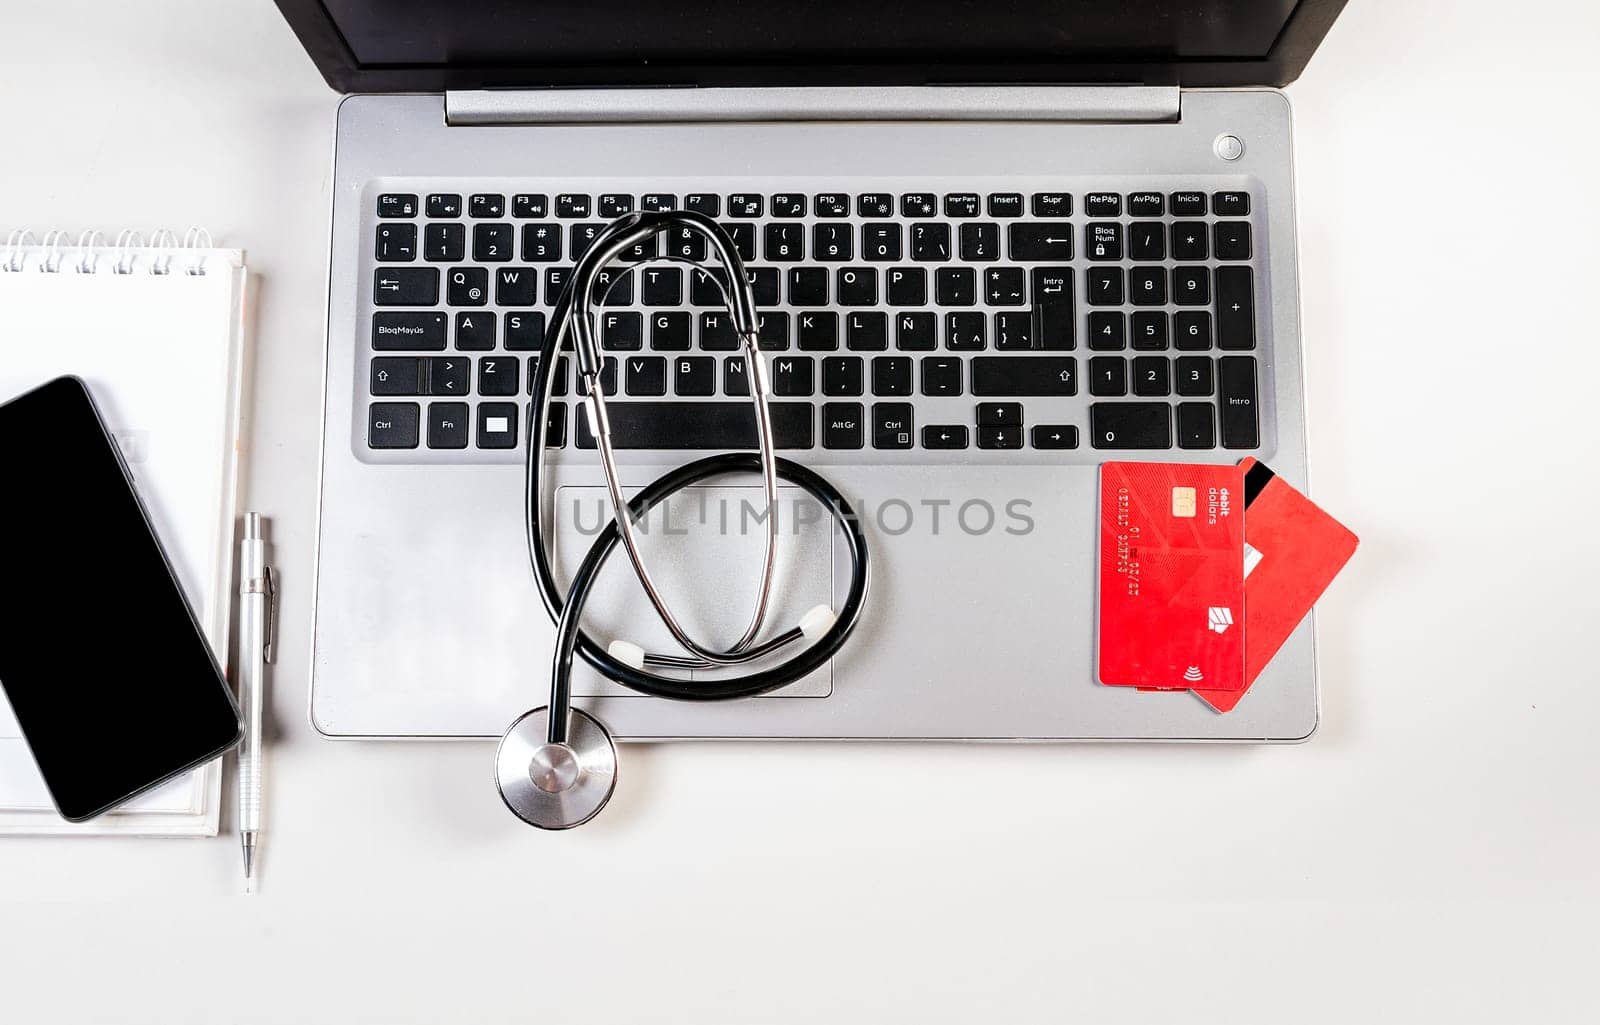 Stethoscope with credit cards on keyboard. Stethoscope on laptop keyboard with credit cards by isaiphoto